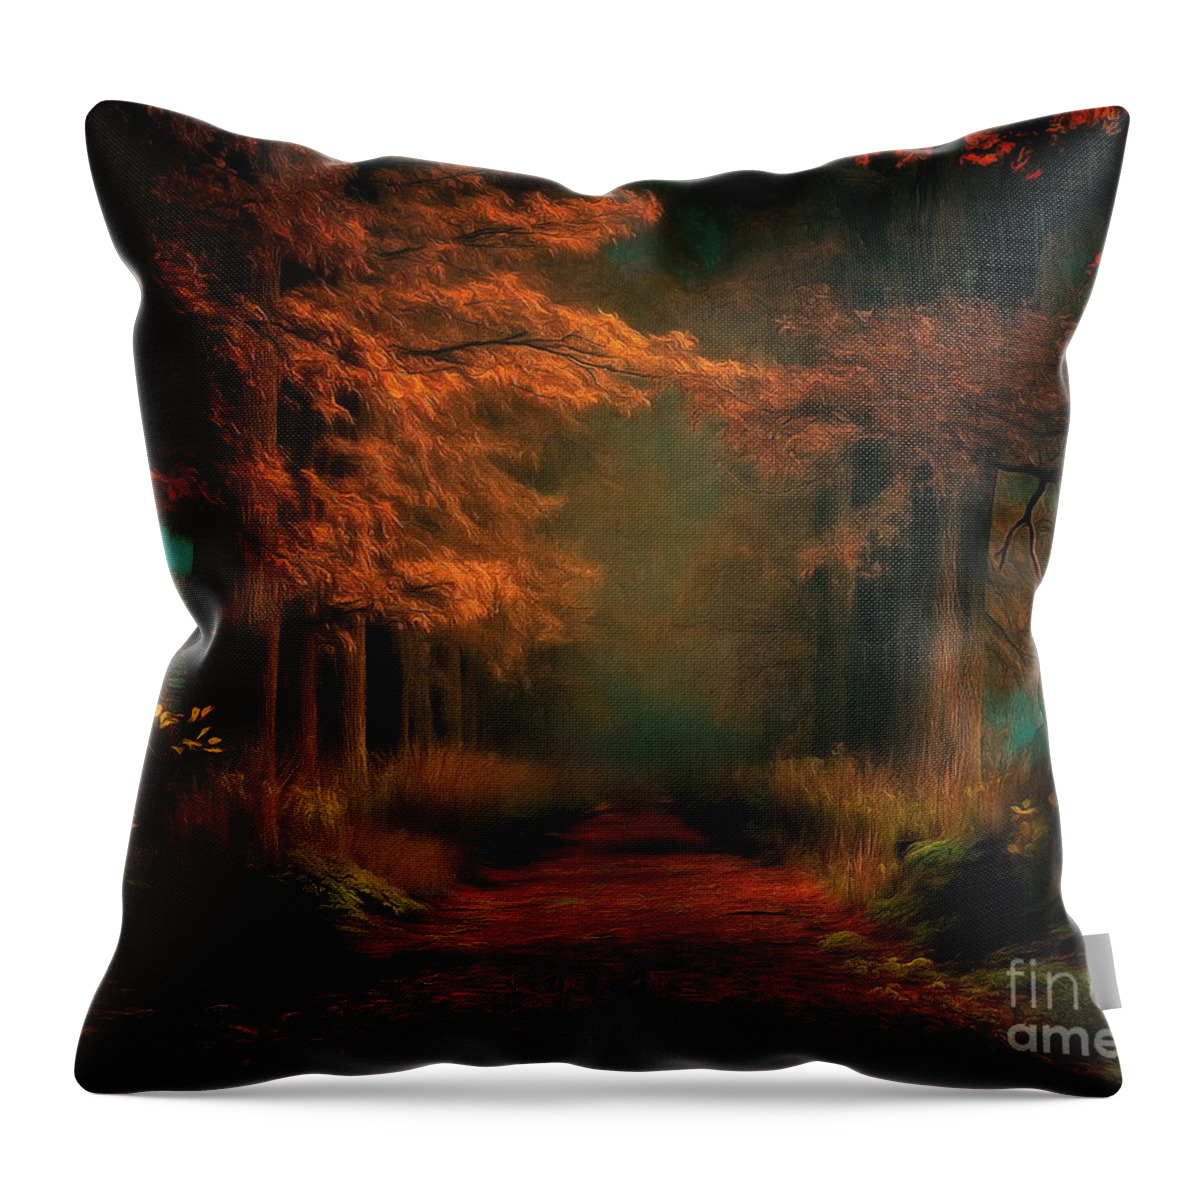 Forest Throw Pillow featuring the digital art Mystic Forest by Jerzy Czyz